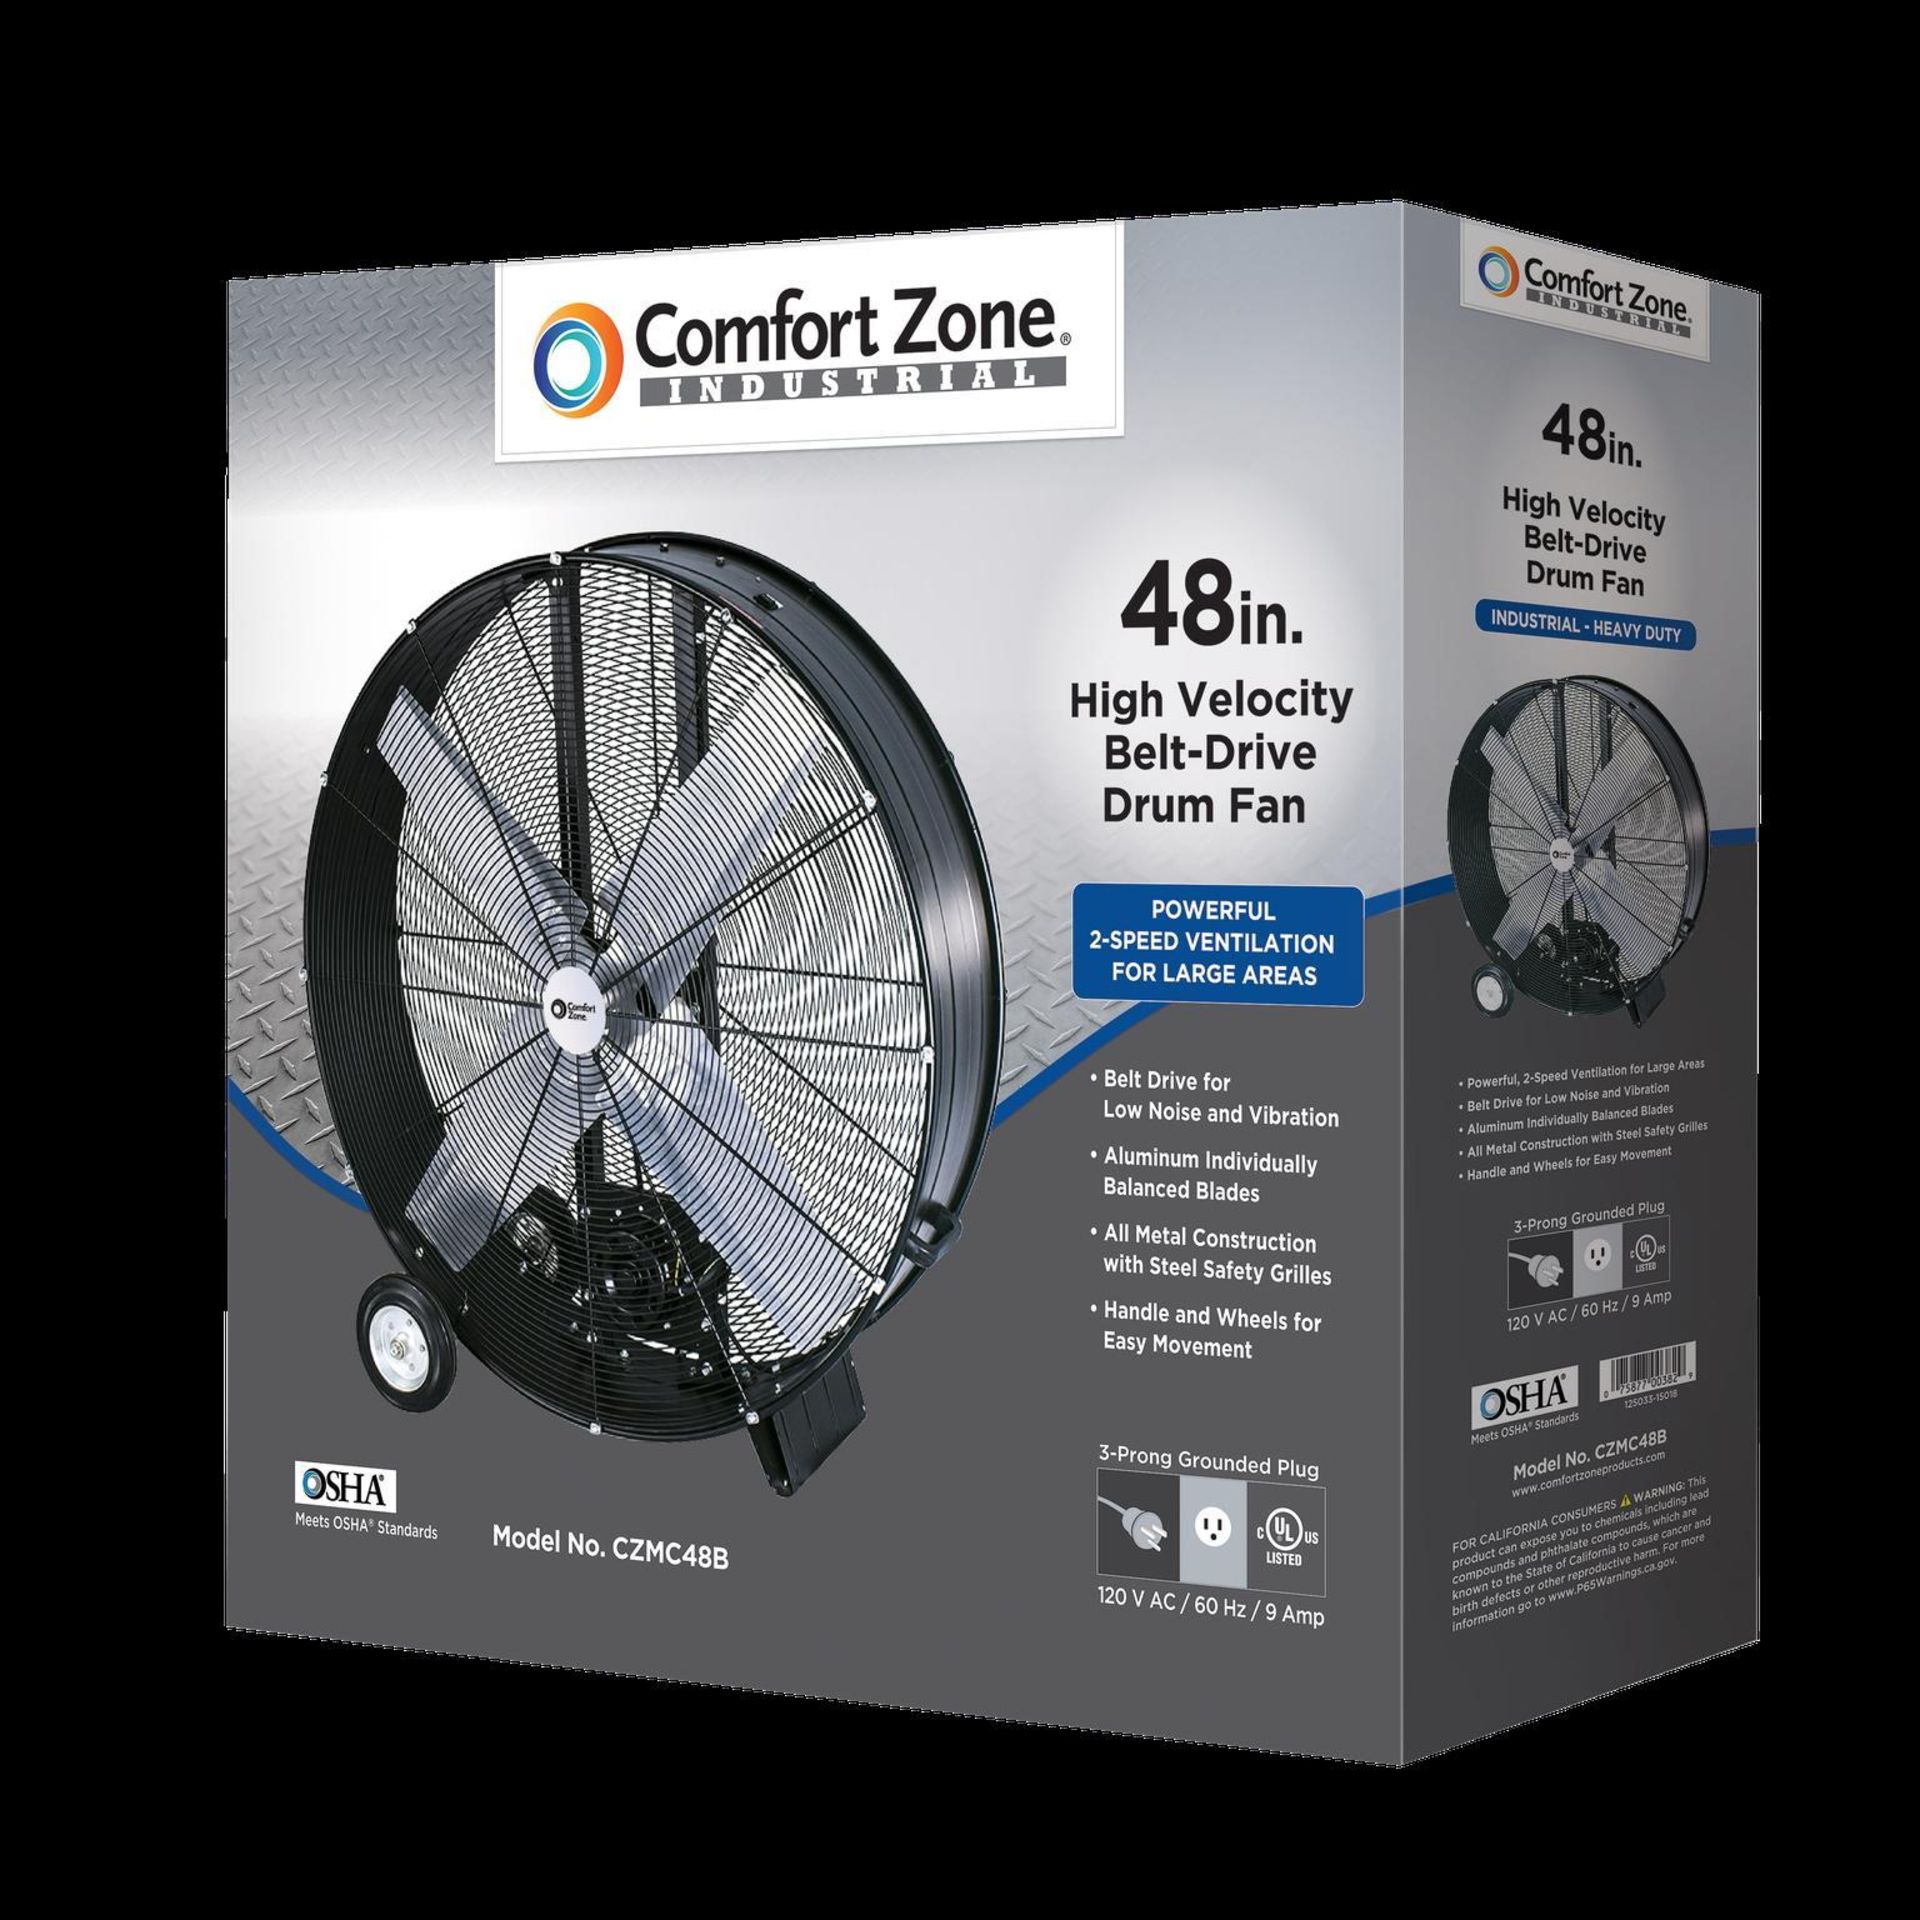 HIGH VELOCITY BELT DRIVE DRUM FAN, COMFORT ZONE MDL. CZMC48B, 48", 19,500 CFM (Located at: H2 Brands - Image 2 of 2